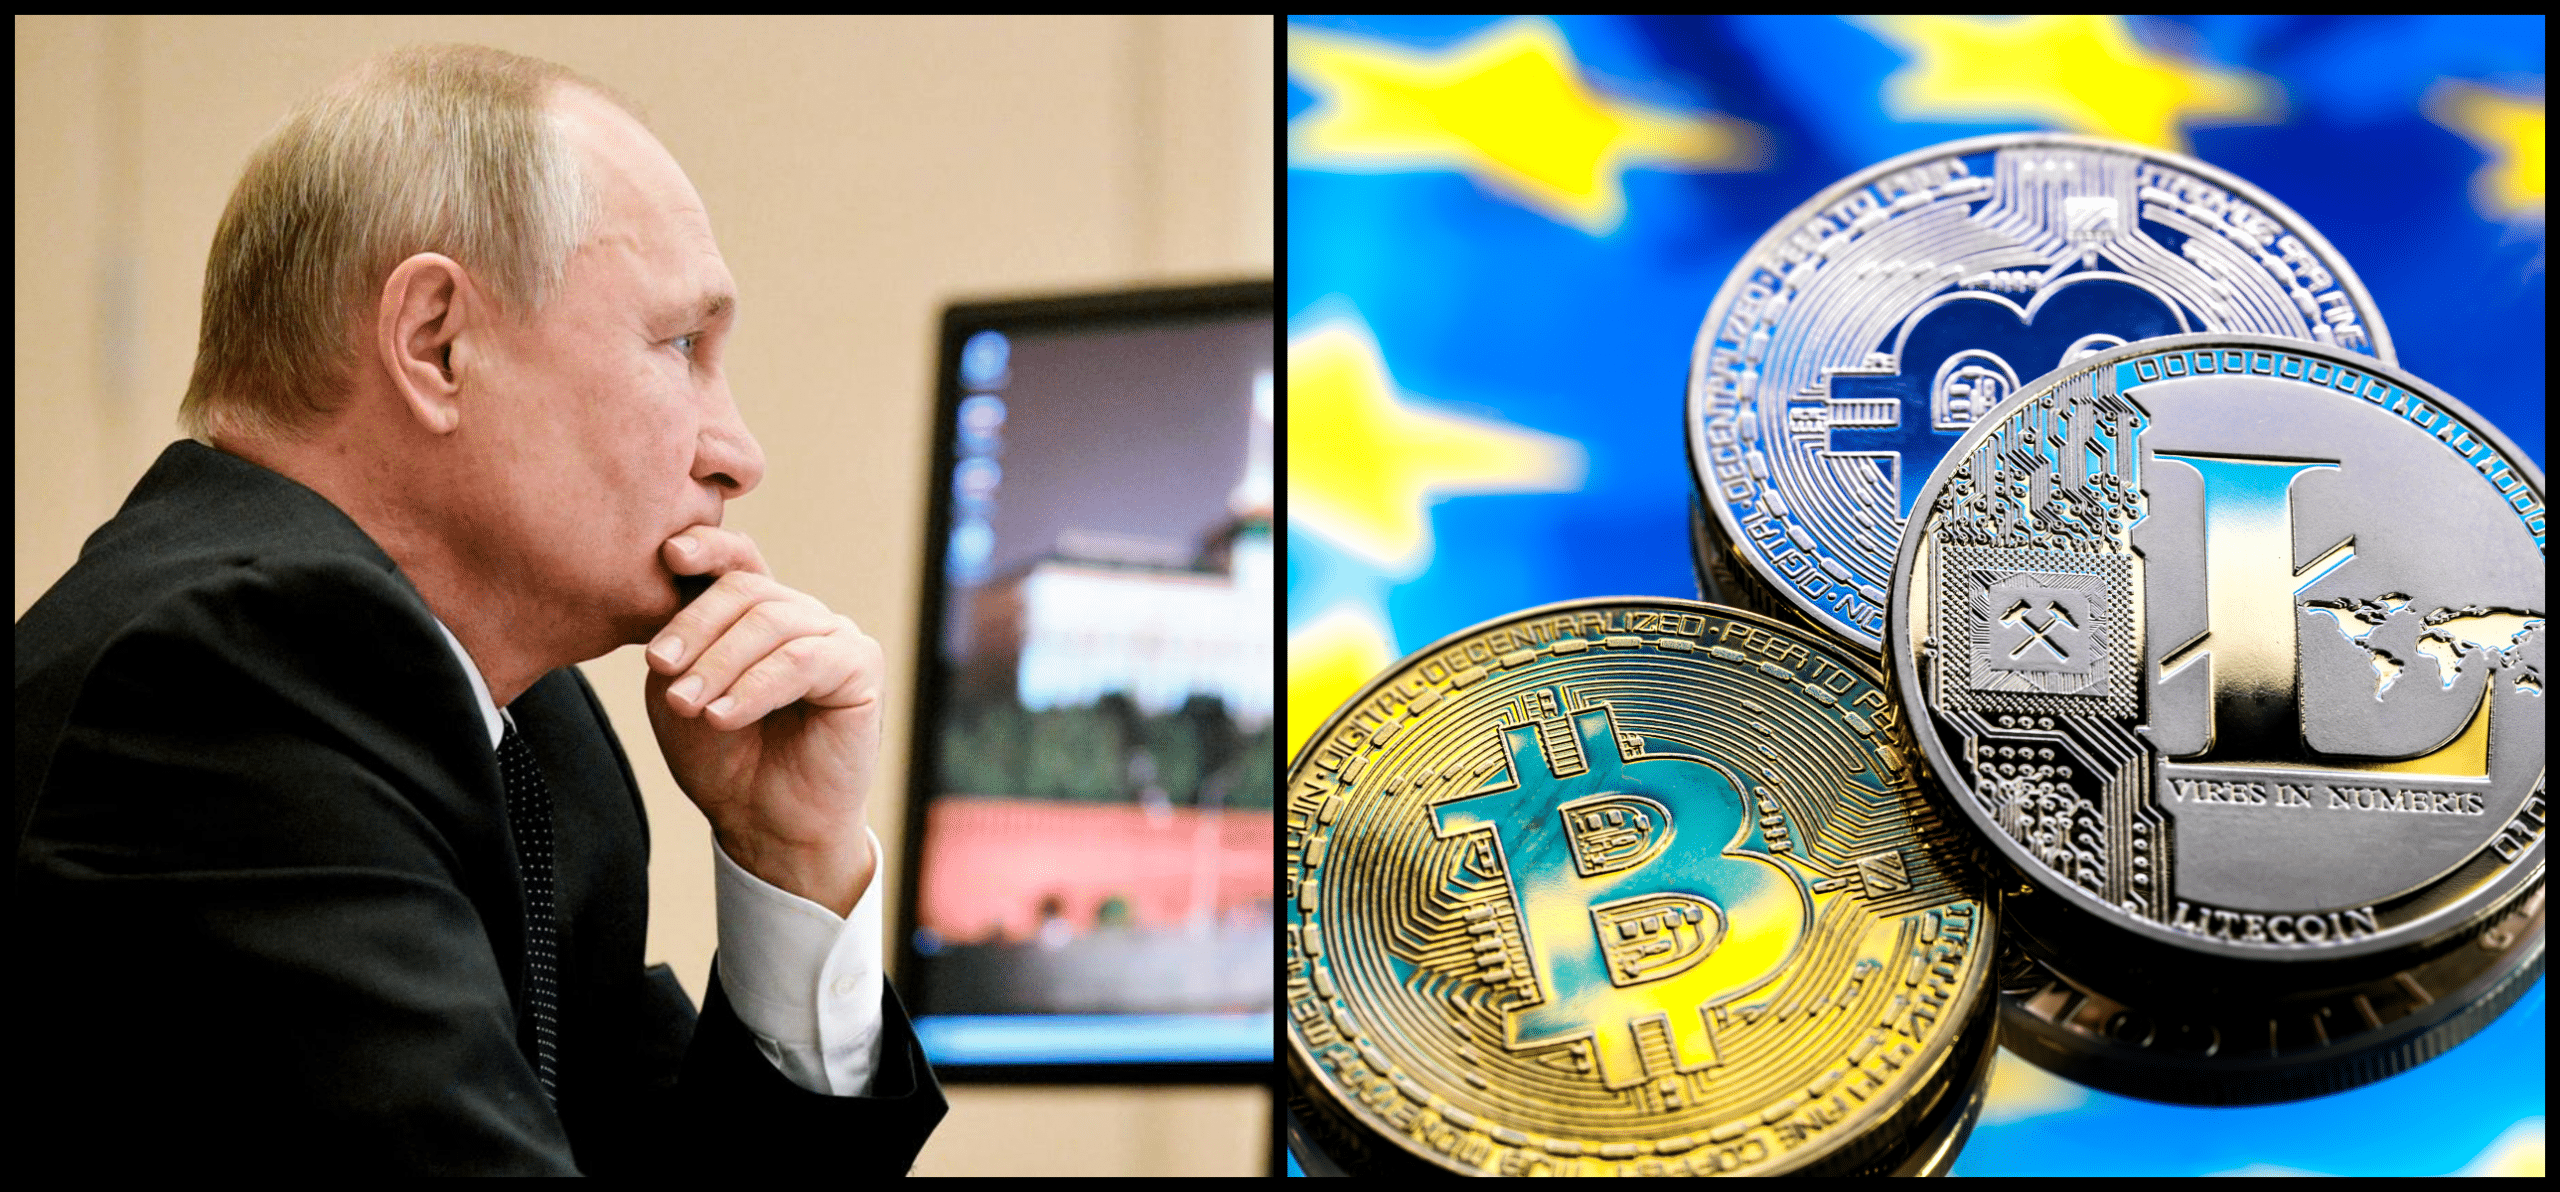 Another world power will start a new era.  Russia has fully launched the development of the digital currency